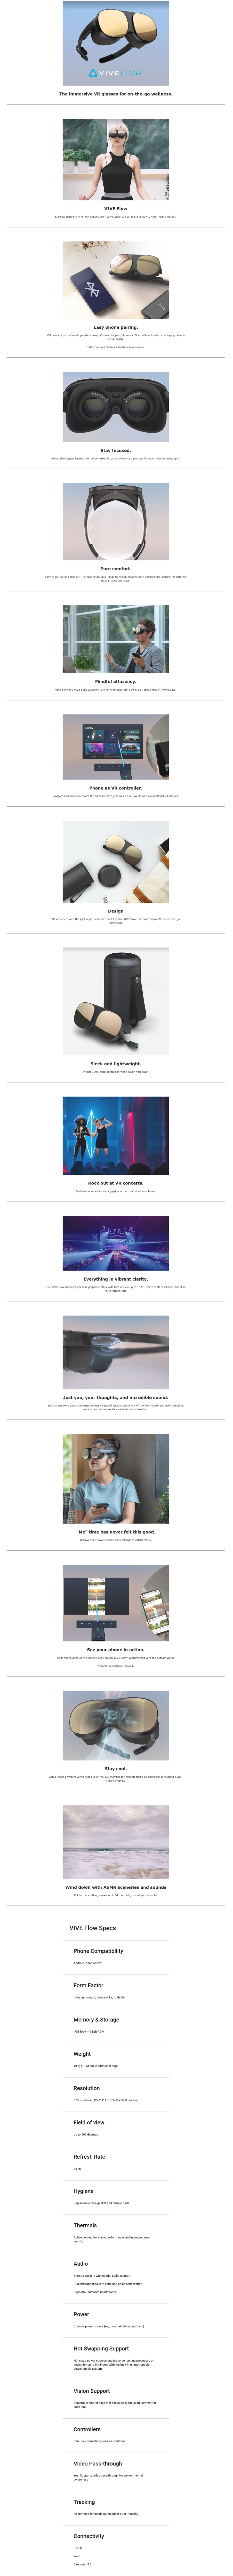 A large marketing image providing additional information about the product HTC Vive Flow Virtual Reality Glasses - Additional alt info not provided